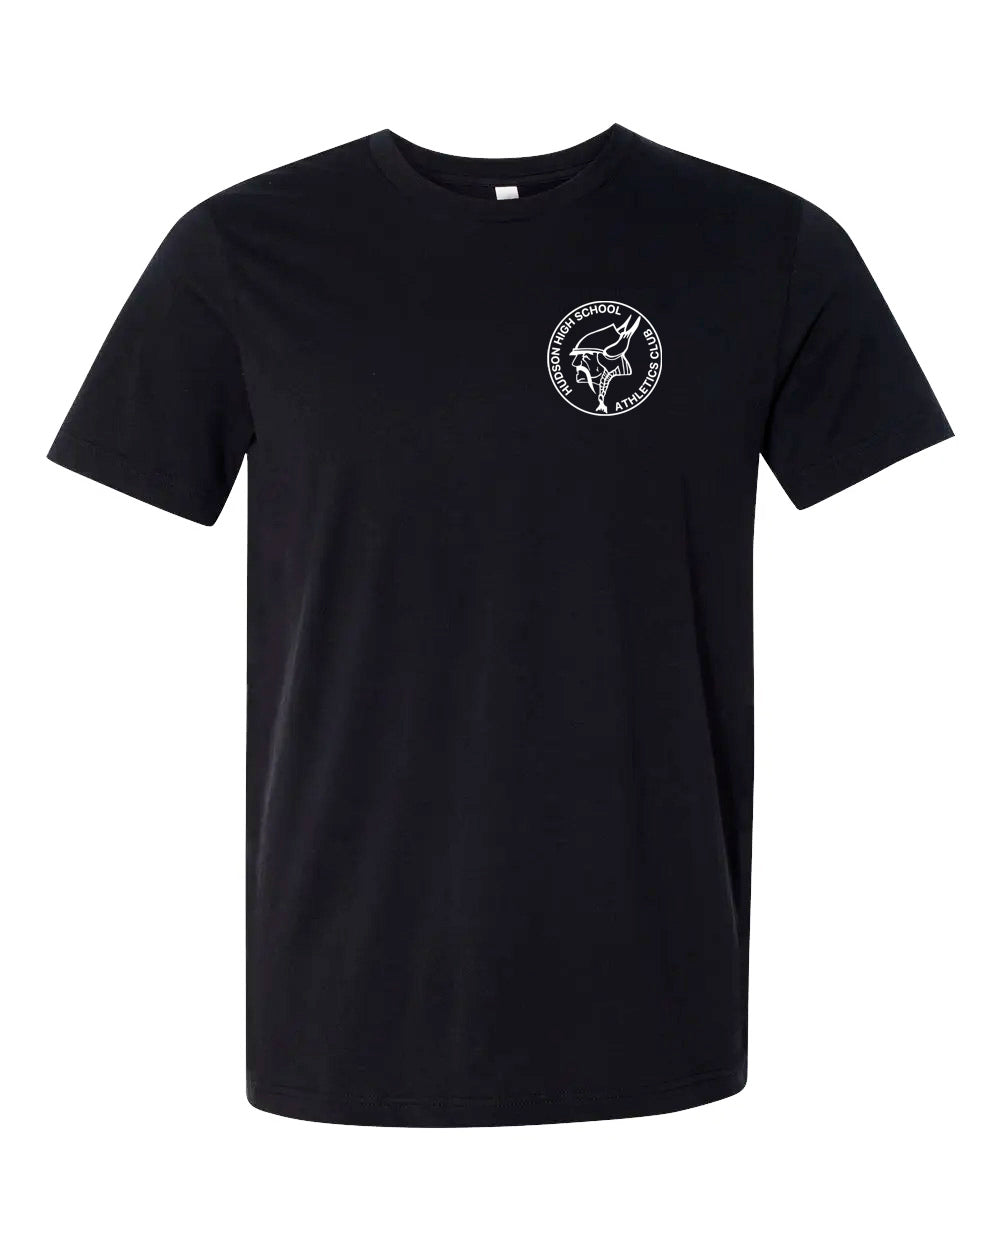 VINTAGE HHS ATHLETICS CLUB CREST T-Shirts | Unsettled Apparel